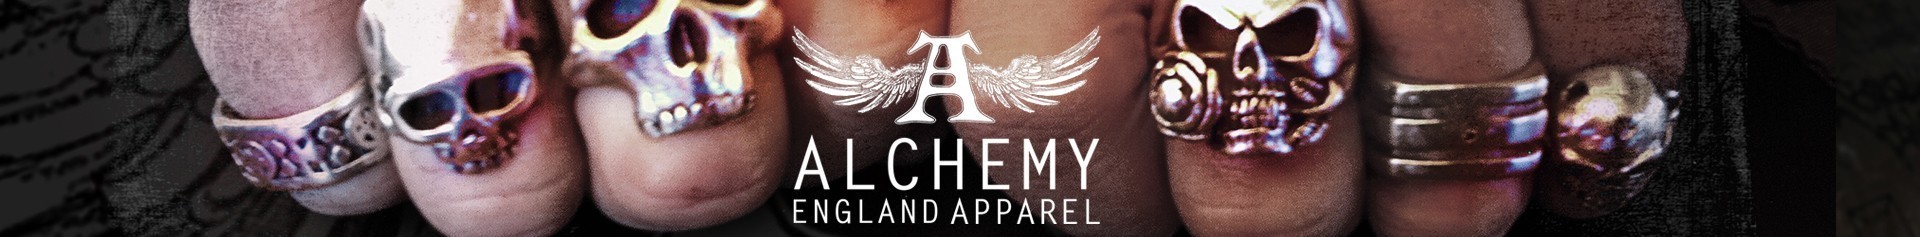 alchemy england apparel collection